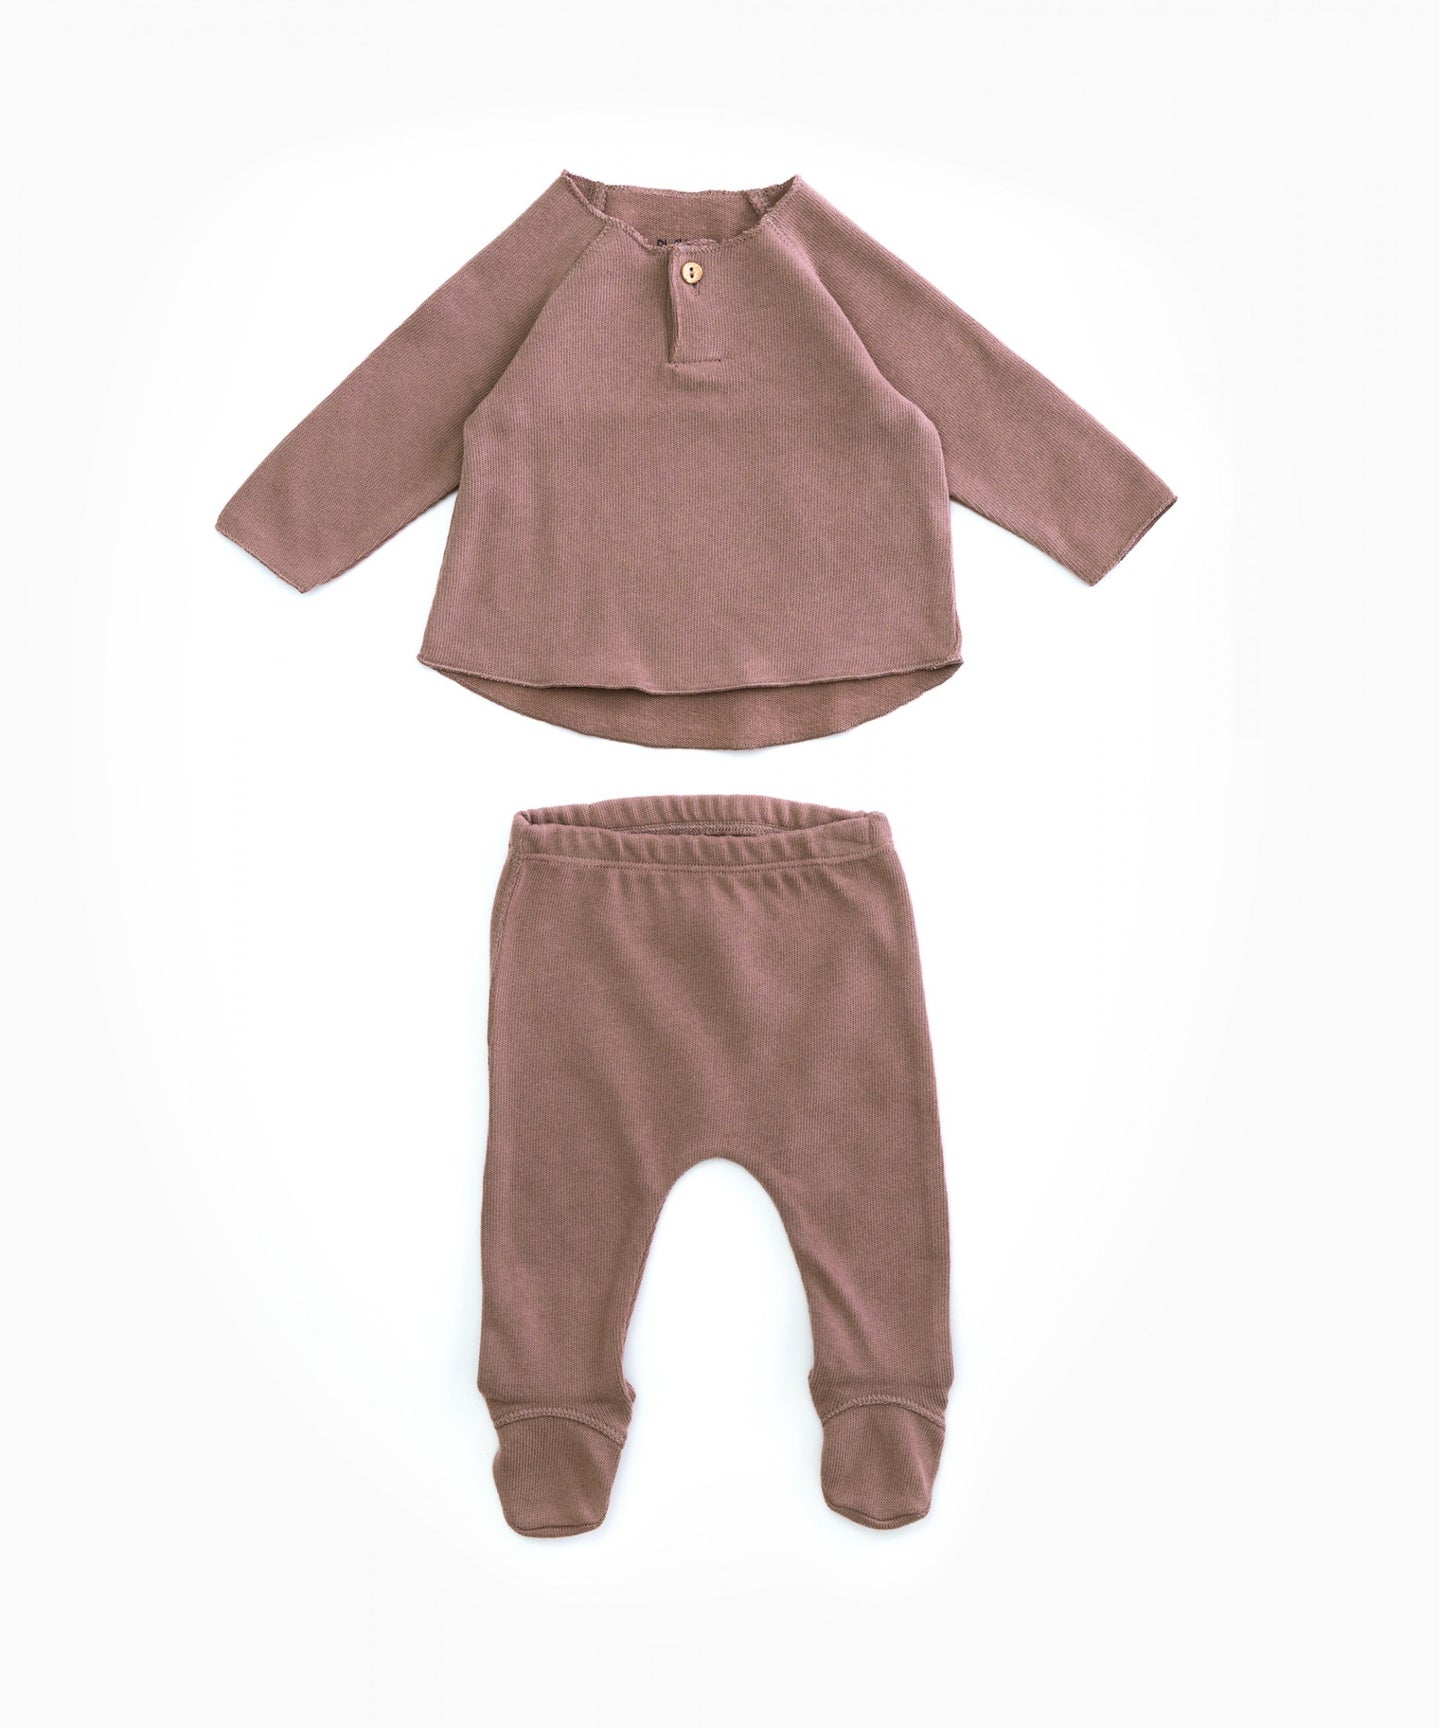 Play Up - Organic Cotton Top & Footed Bottoms Set - Purplework